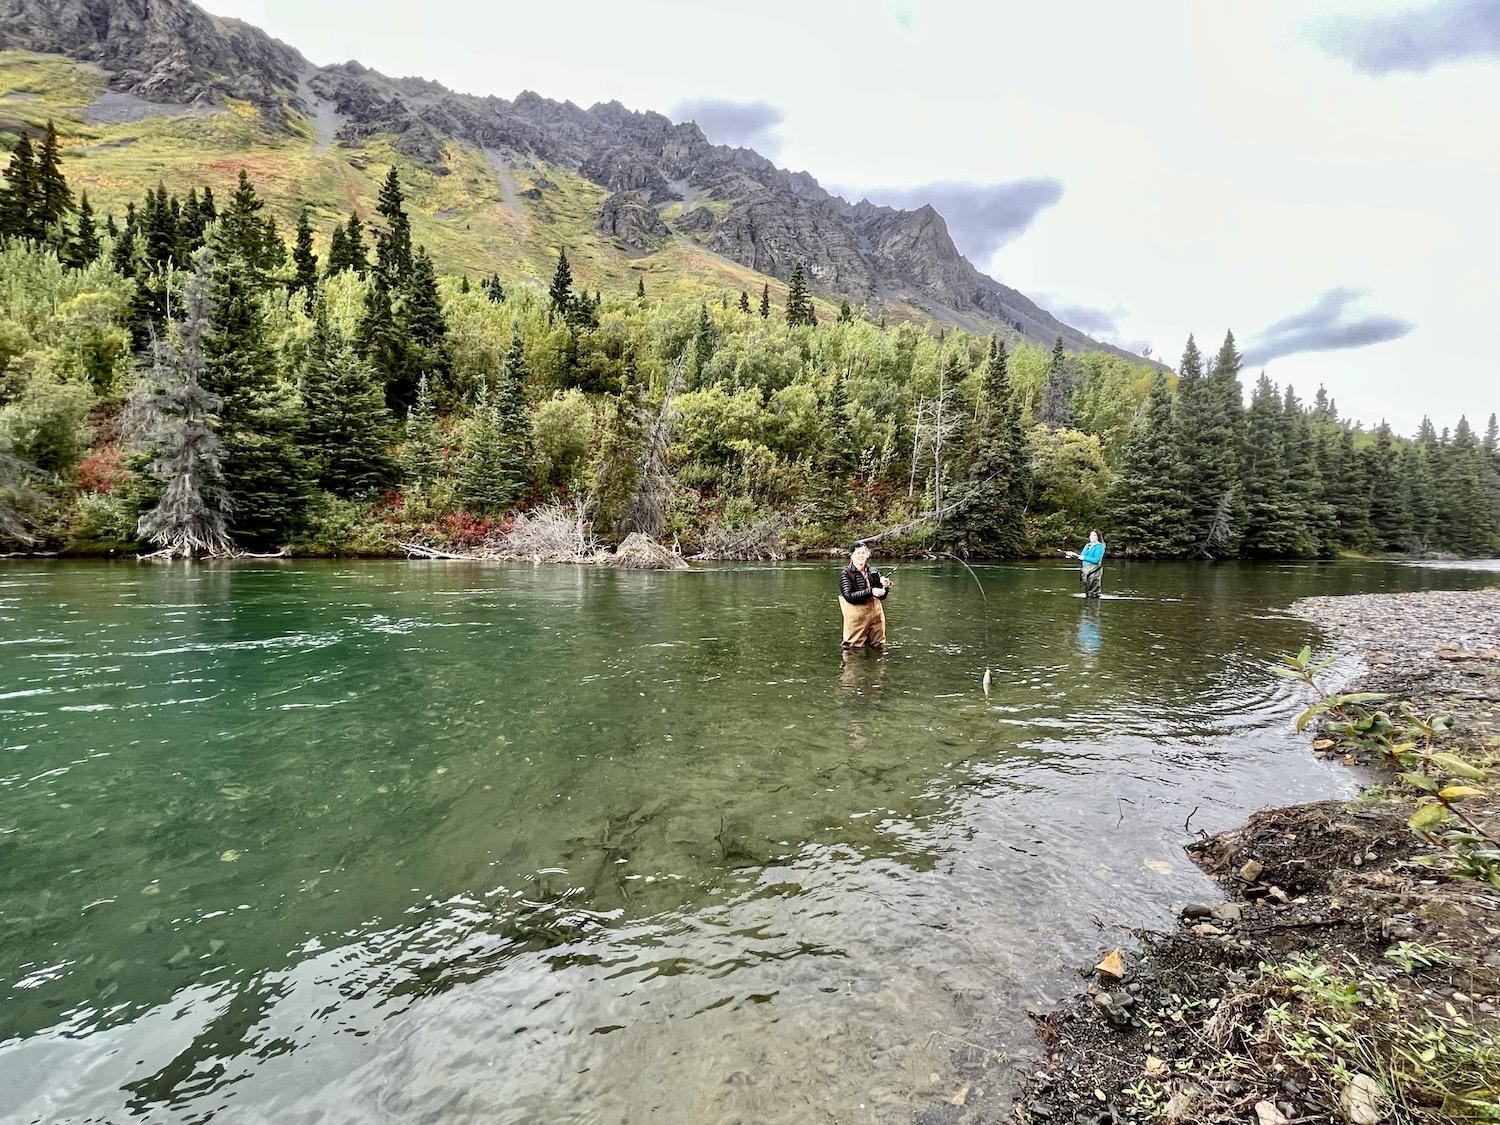 Casting for grayling in the shallow, turquoise waters of Kluane National Park and Reserve.